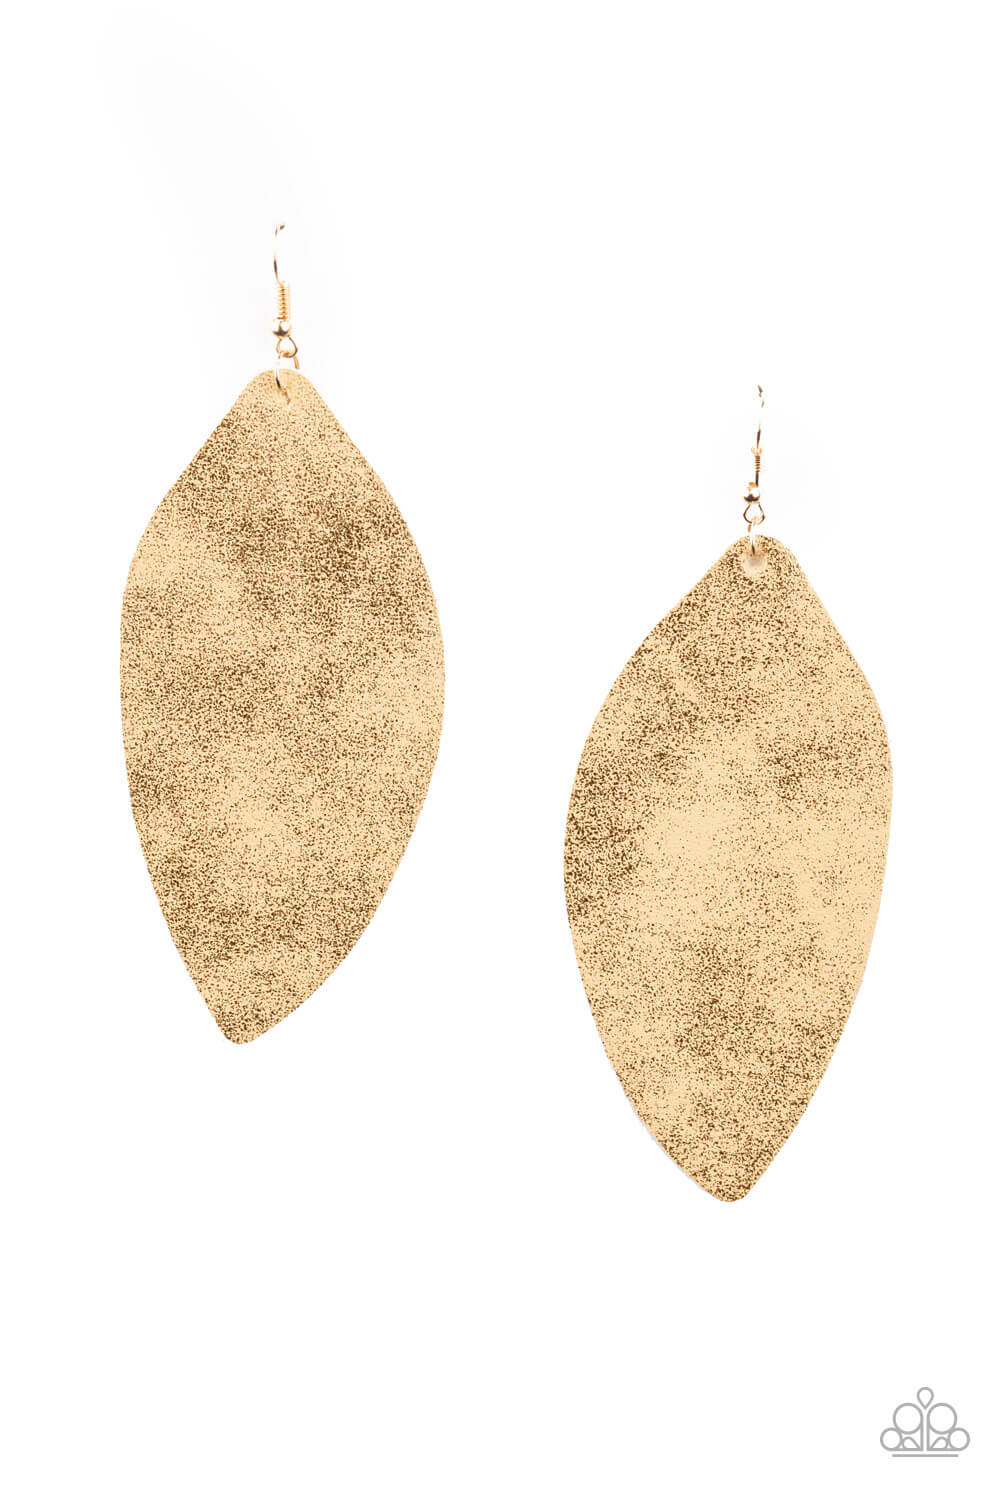 Serenely Smattered - Gold Leather Earrings - Princess Glam Shop